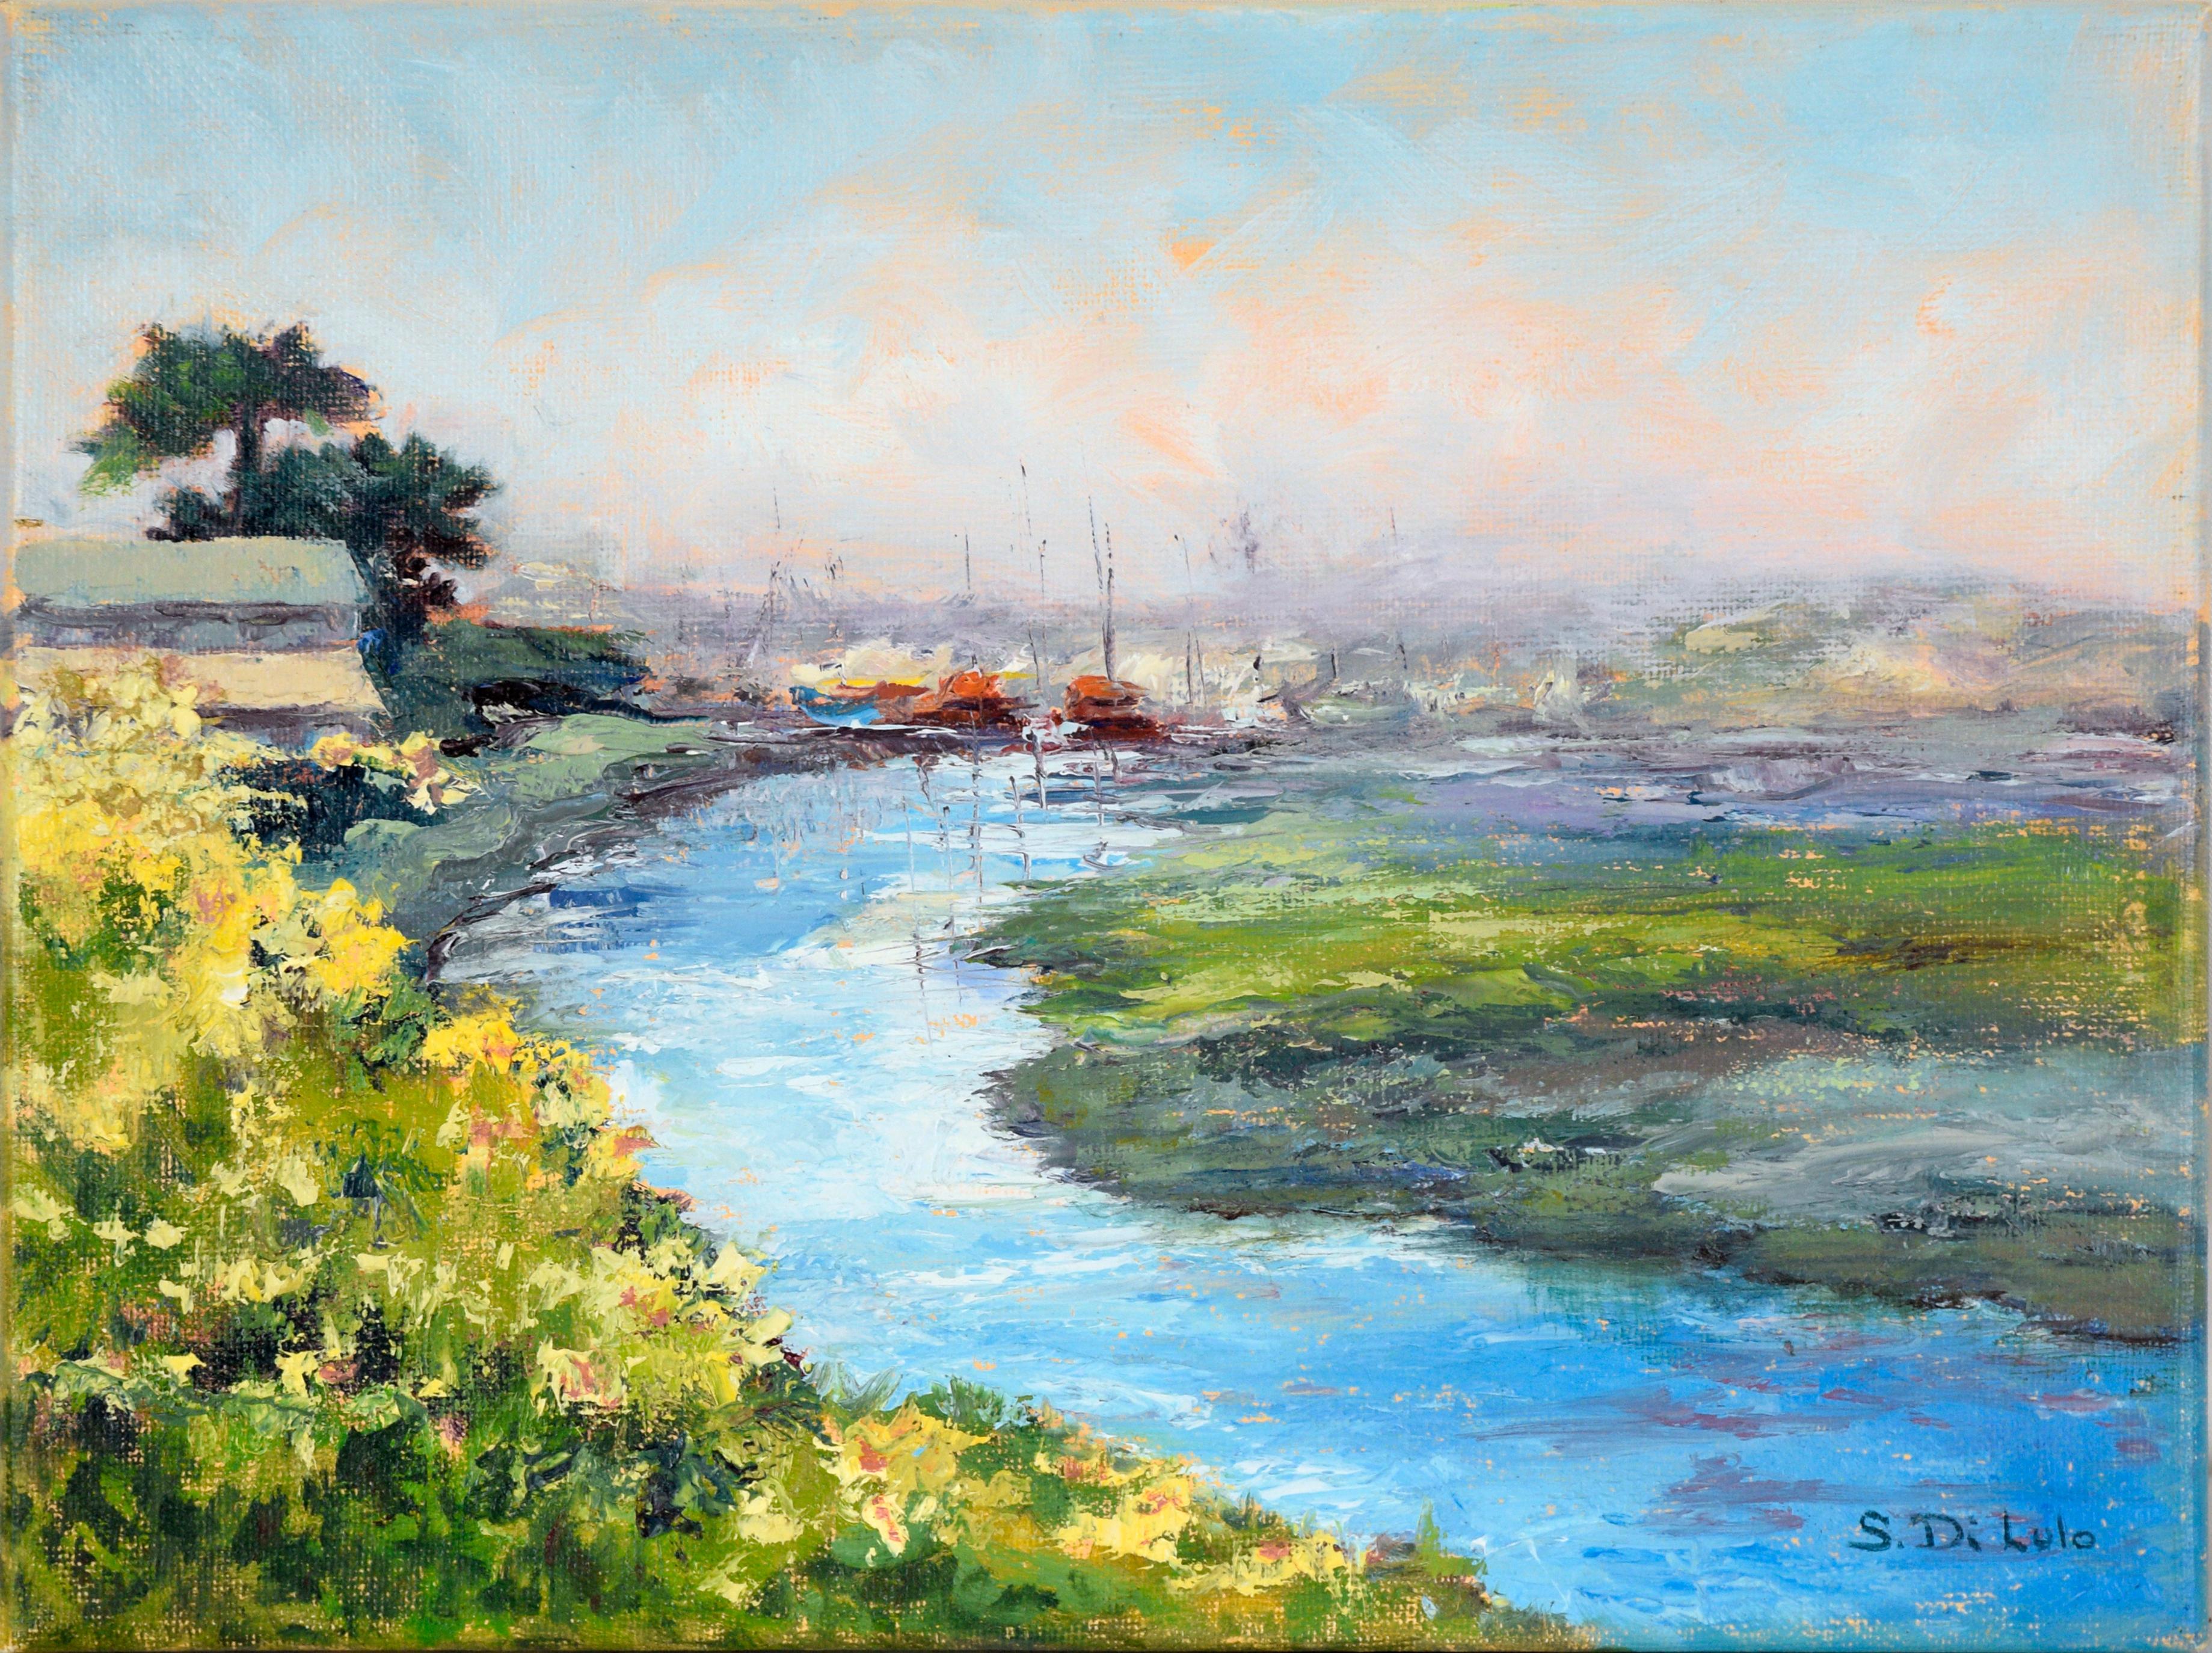 Sherry DiLulo Landscape Painting - Moss Landing Landscape - Plein Air in Oil on Canvas